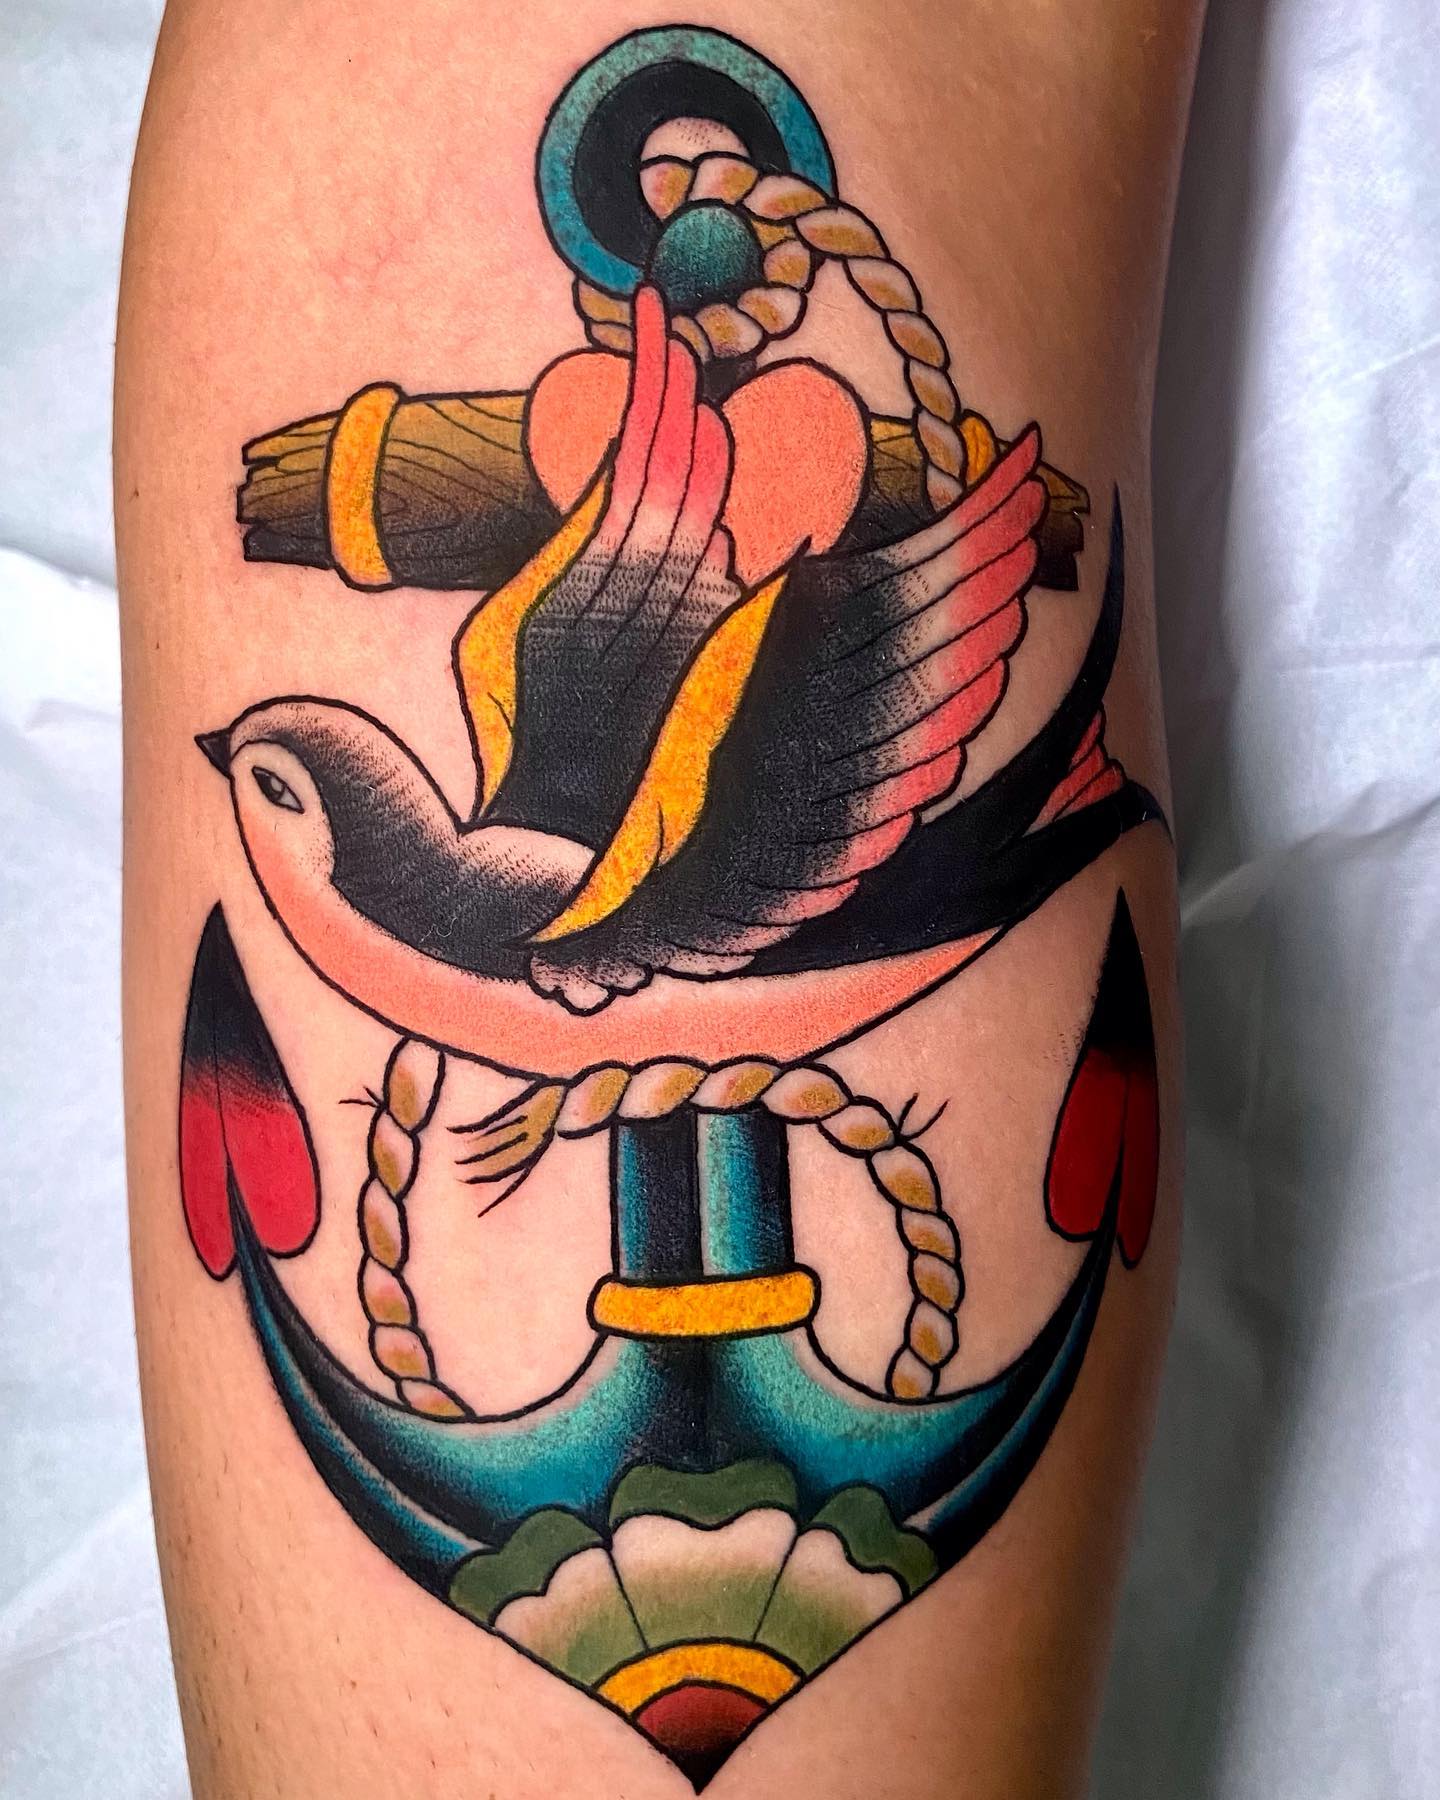 30 Anchor Tattoo Designs to Celebrate the Power of Stability